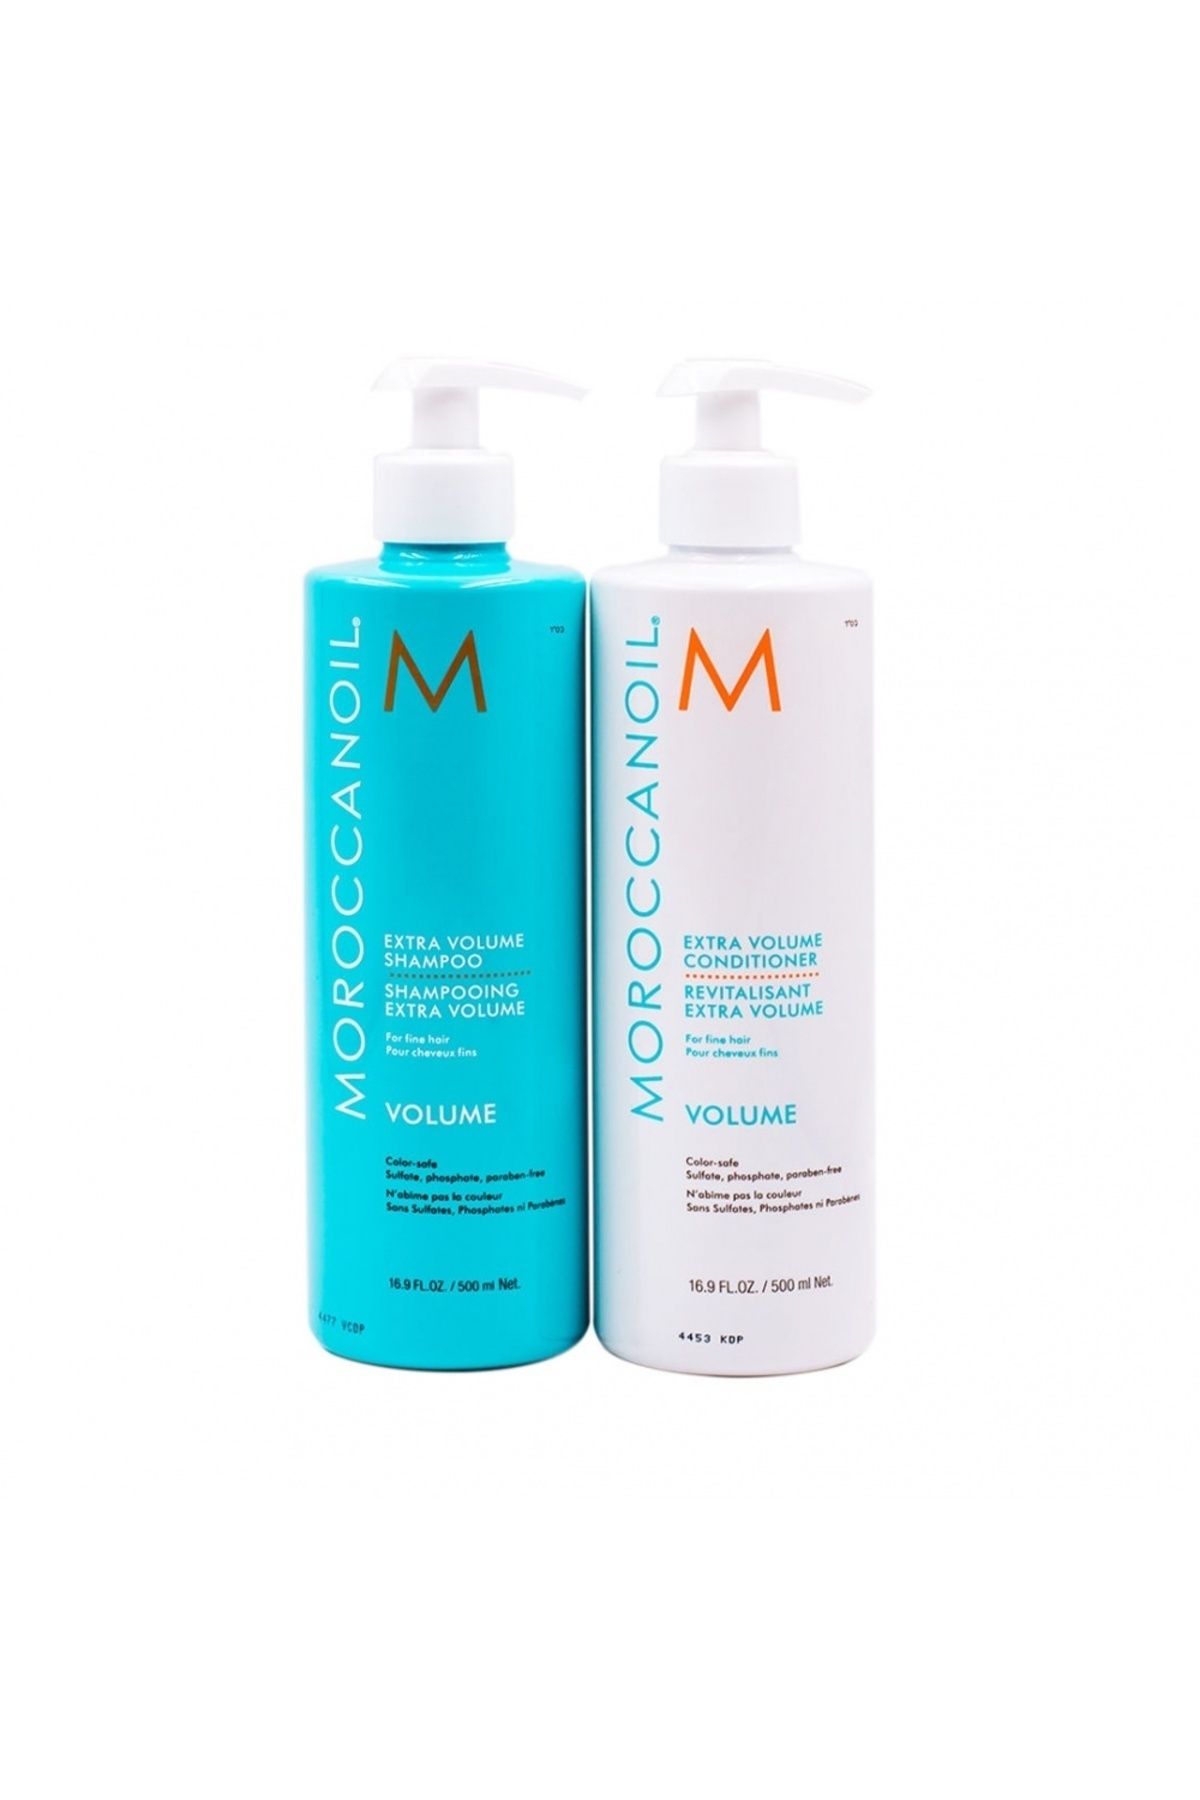 Moroccanoil Extra Volume Shampoo & Extra Volume Conditioner Duo for daily use TRUSTYMCO11